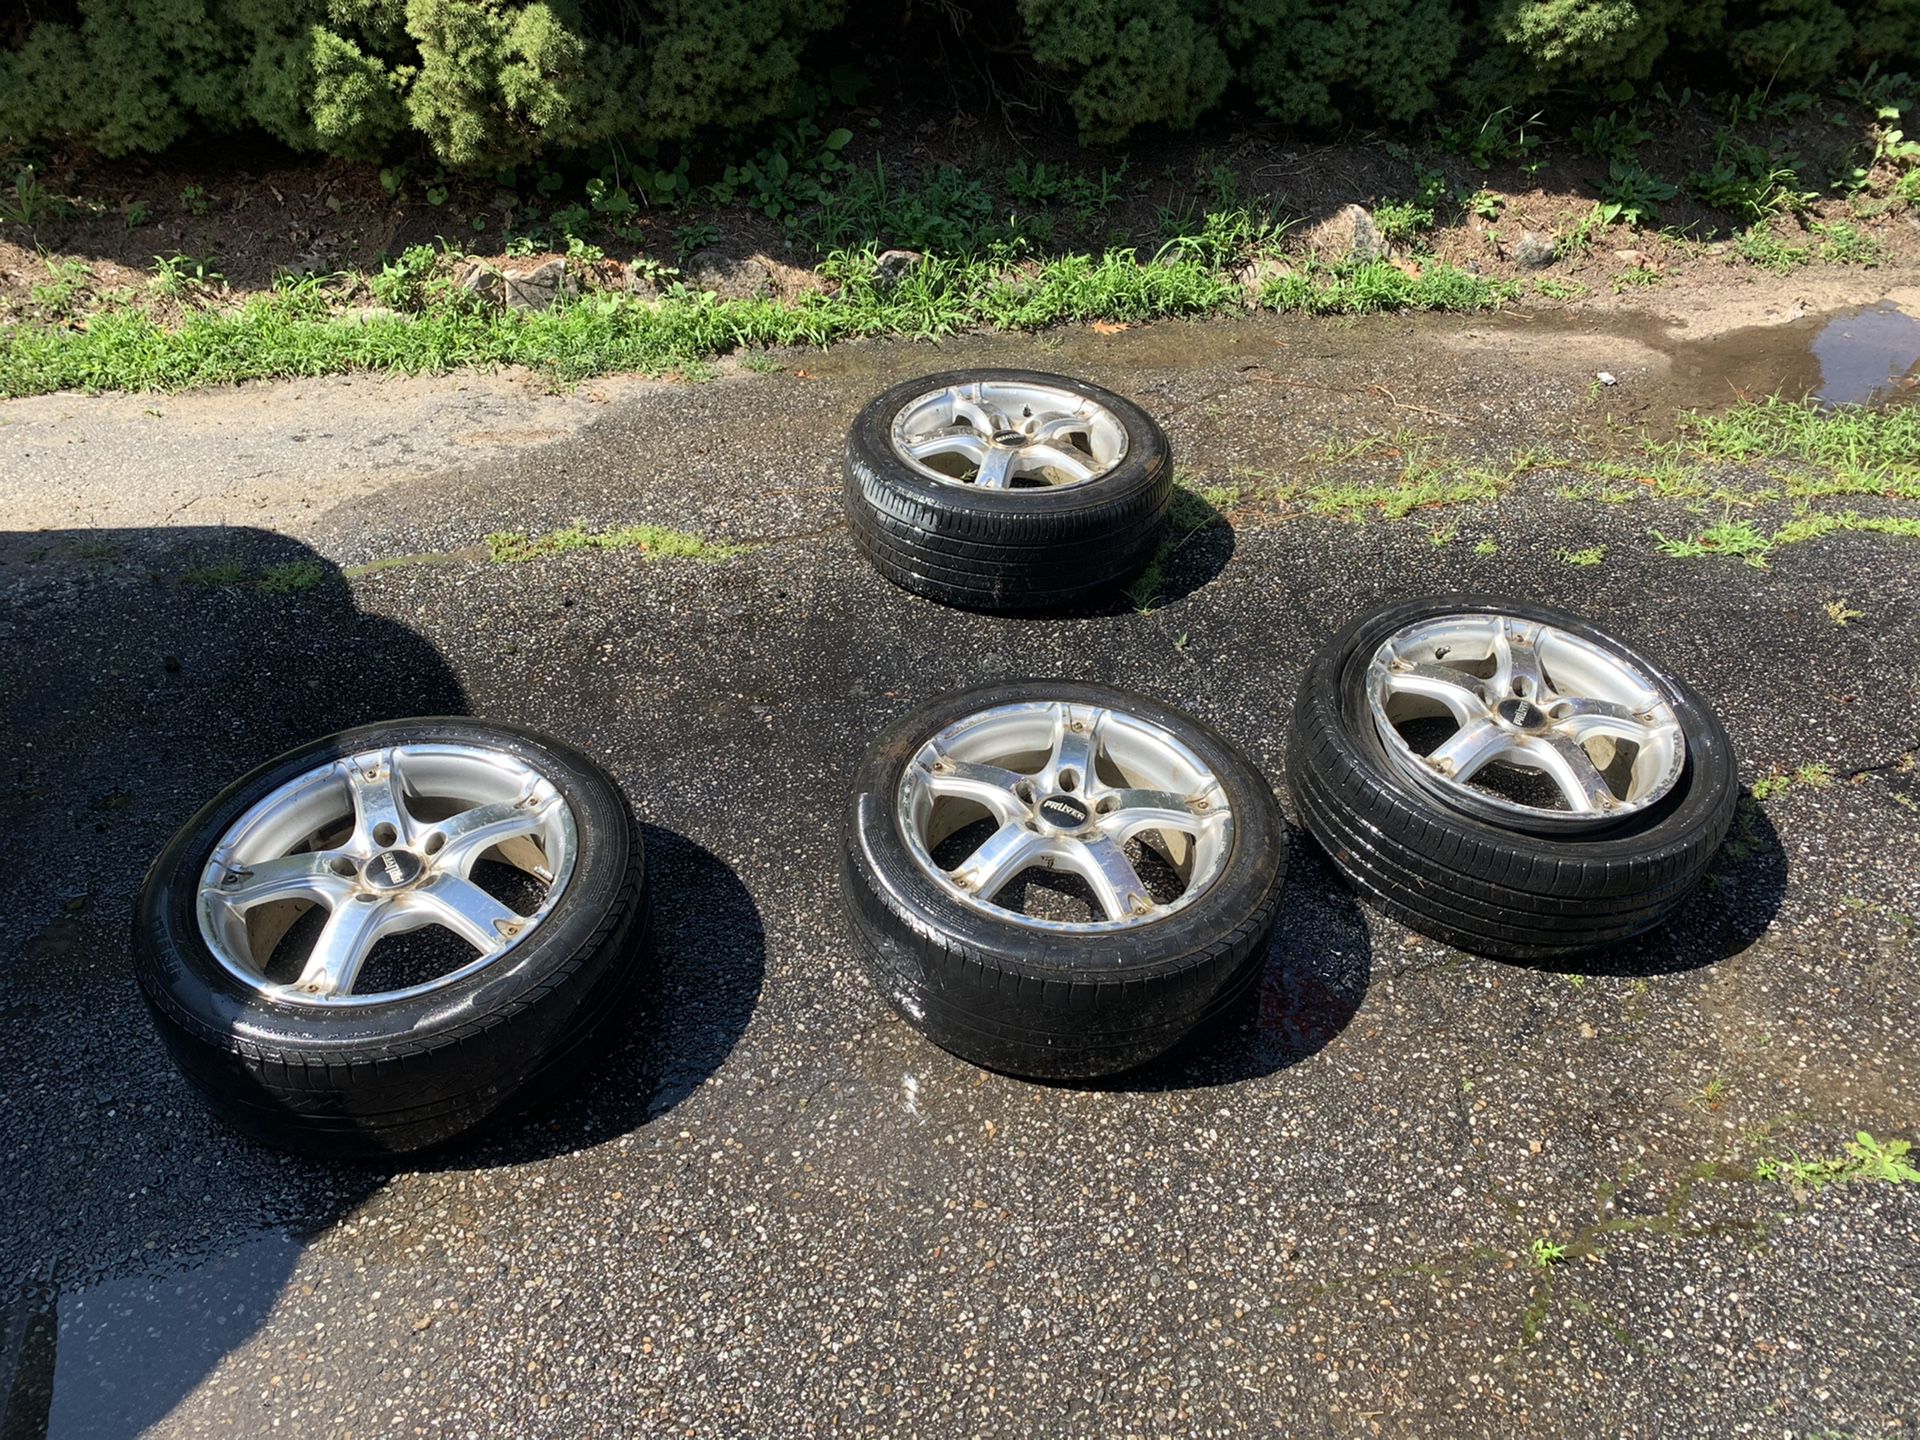 Selling the rims